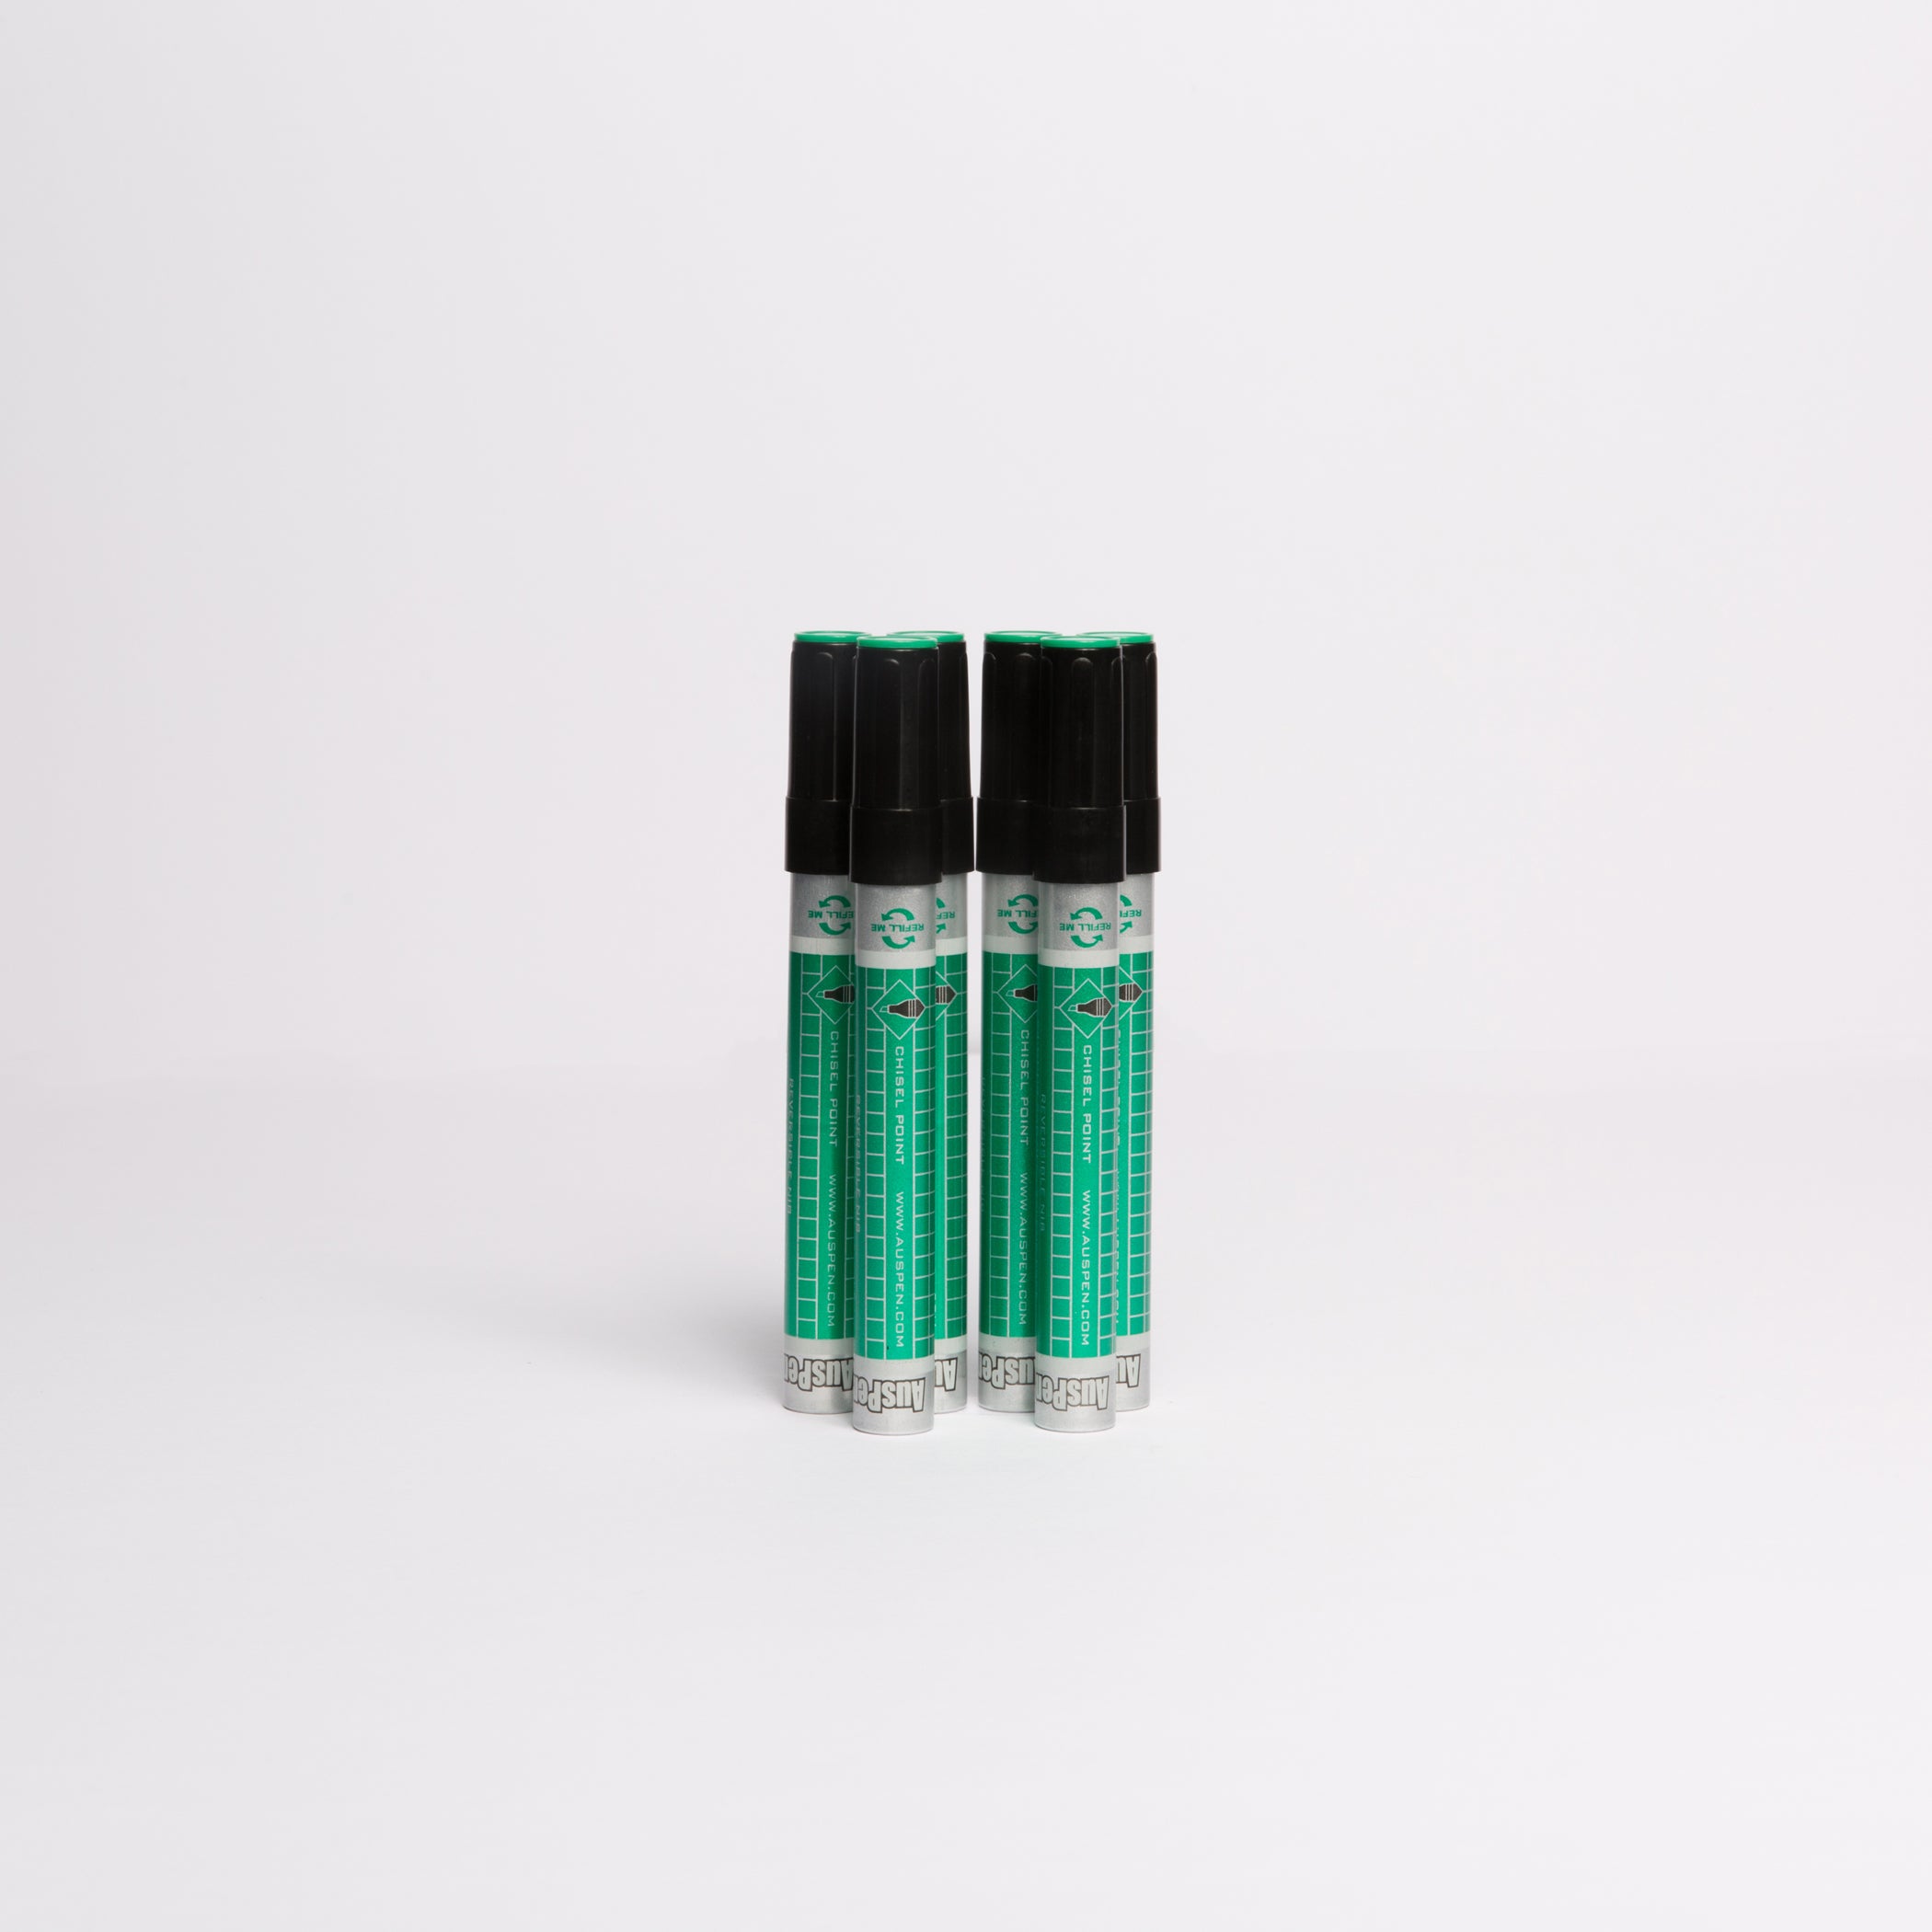 6 Green Refillable Whiteboard Markers